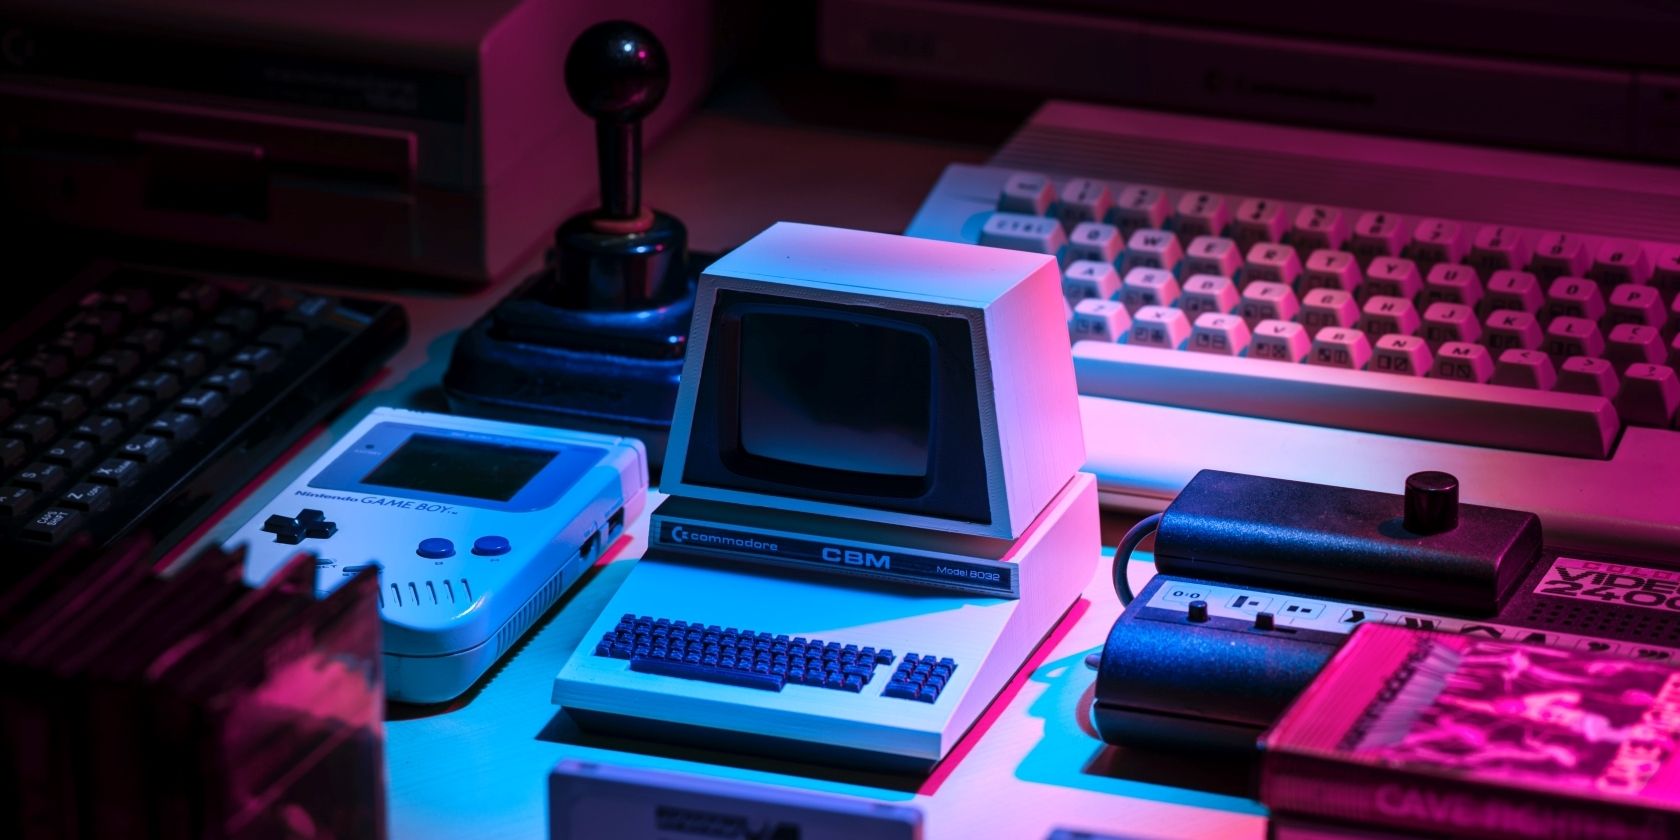 A photograph of a collection of retro gaming consoles and games held under a bright pink and blue light